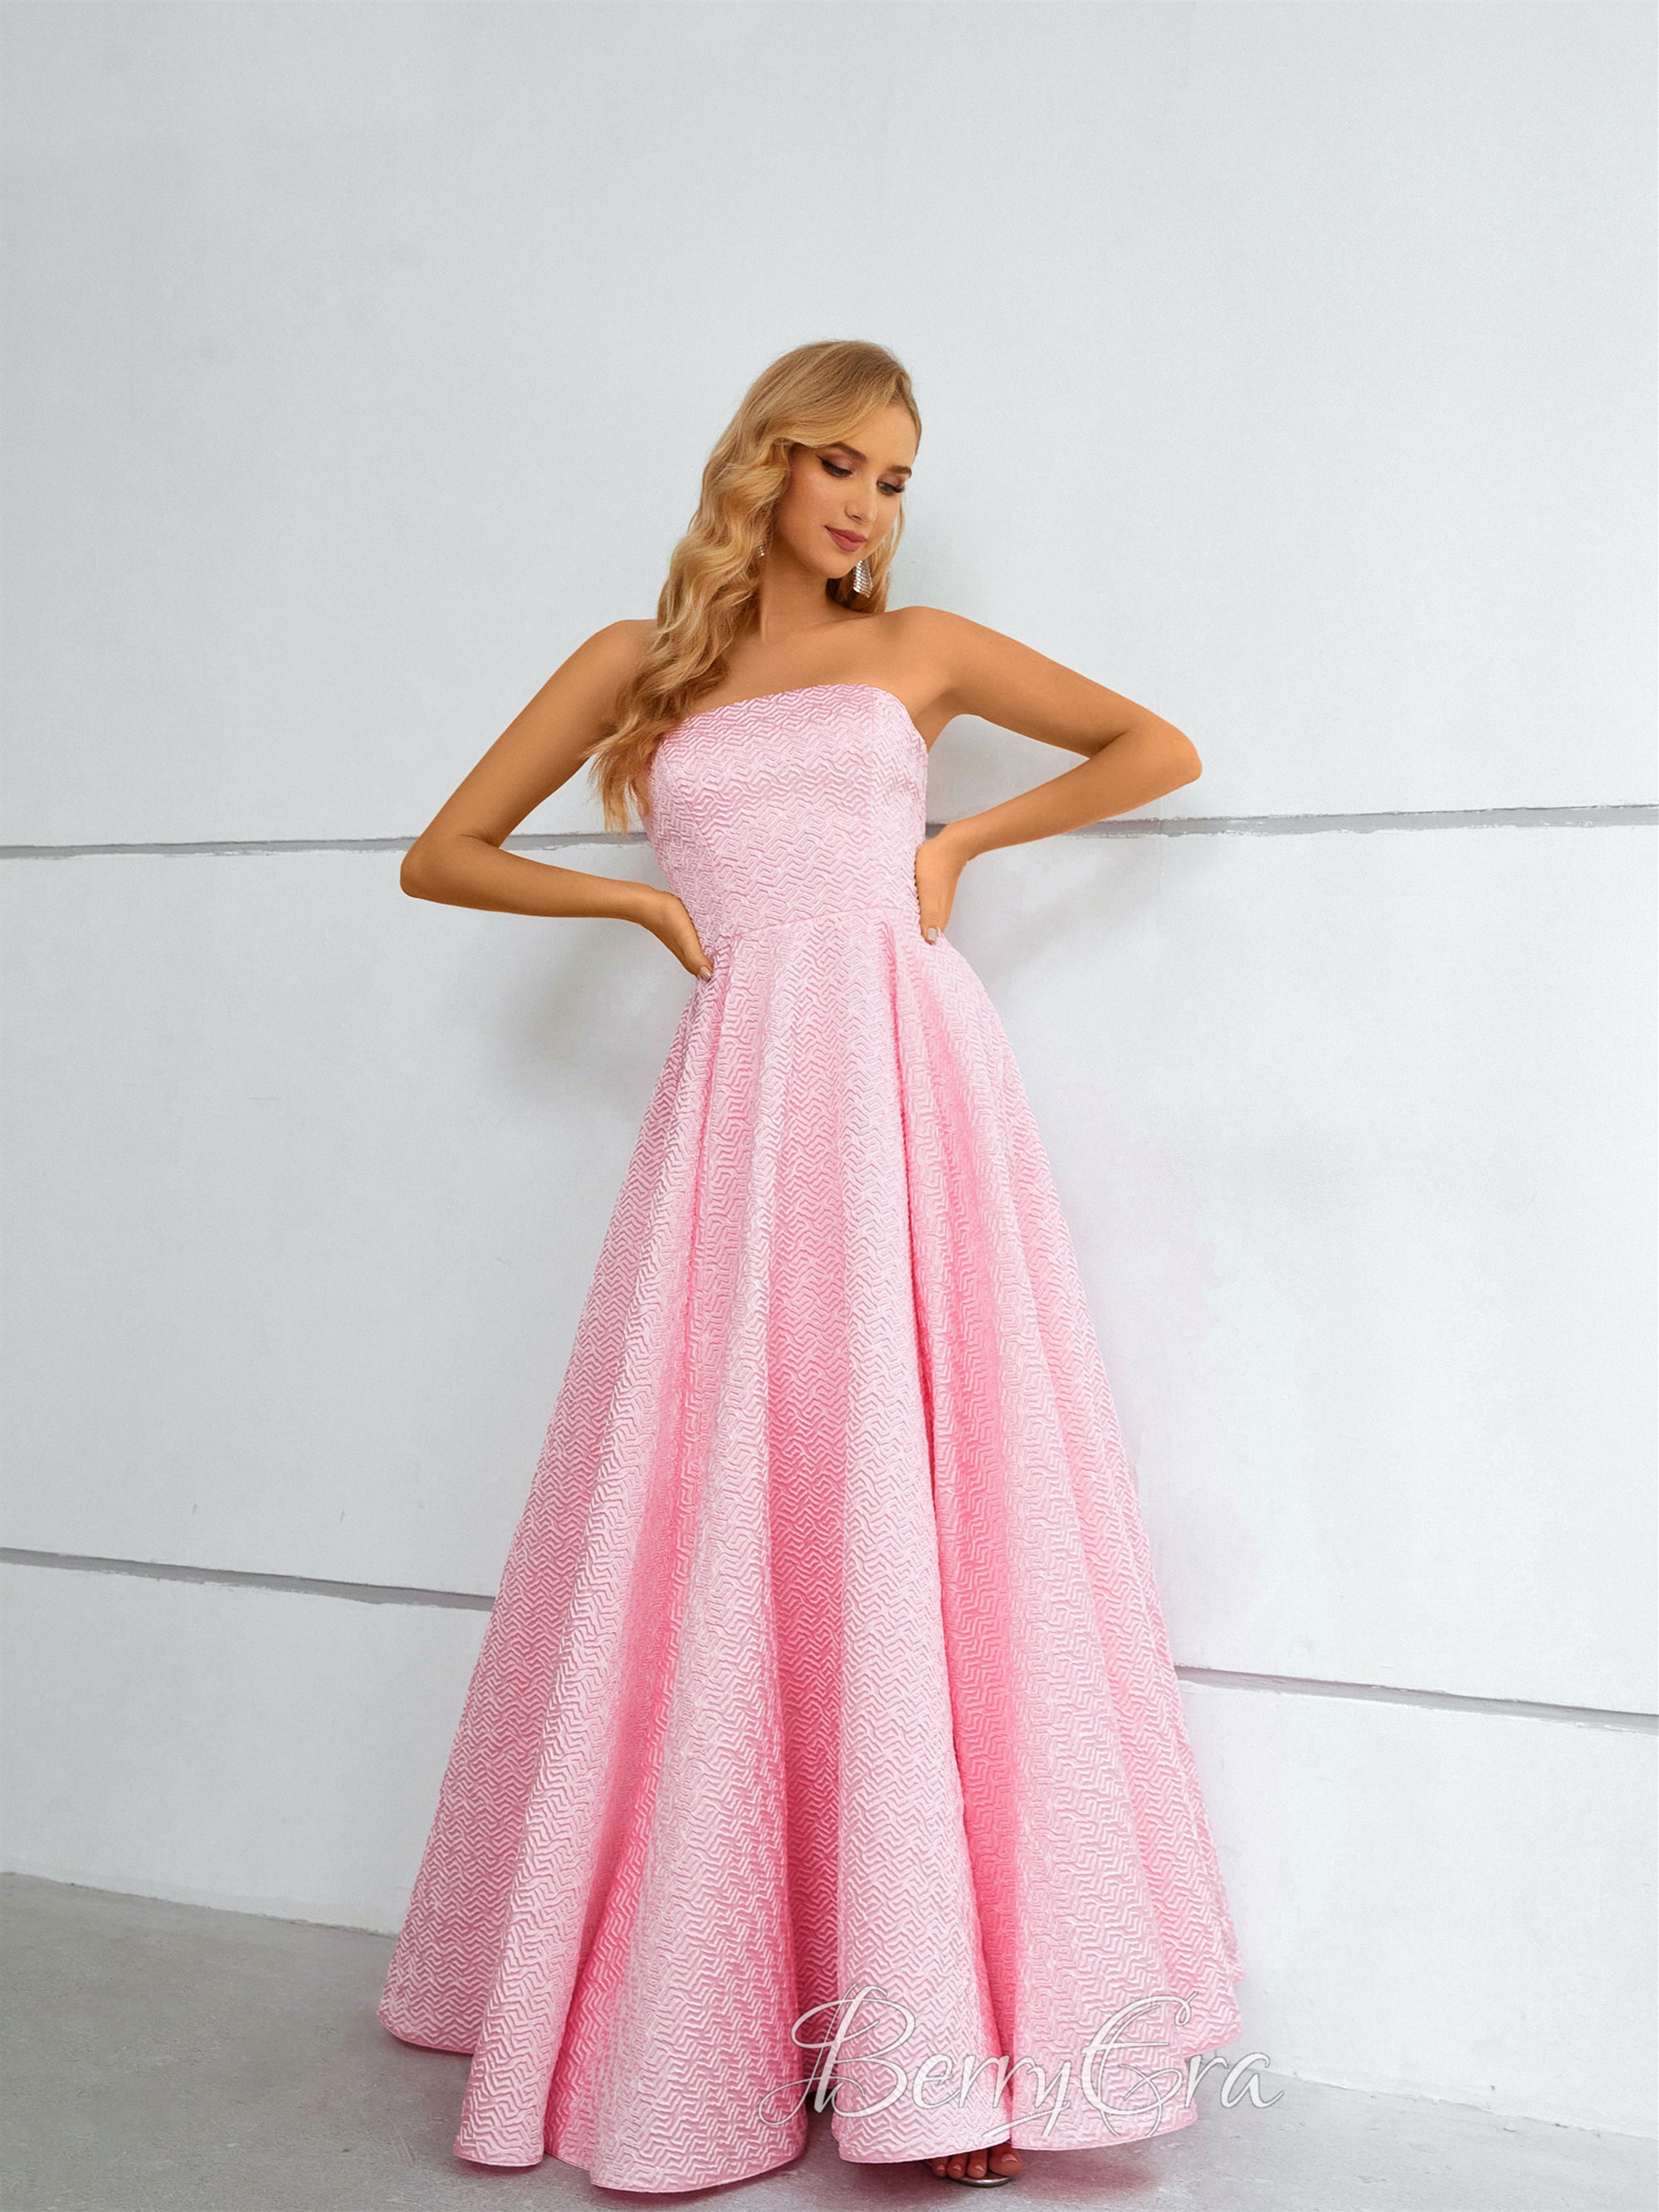 Pink Printed Satin A-line Prom Dresses, Simple Prom Dresses, Graduation Party Dresses, 2023 Prom Dresses